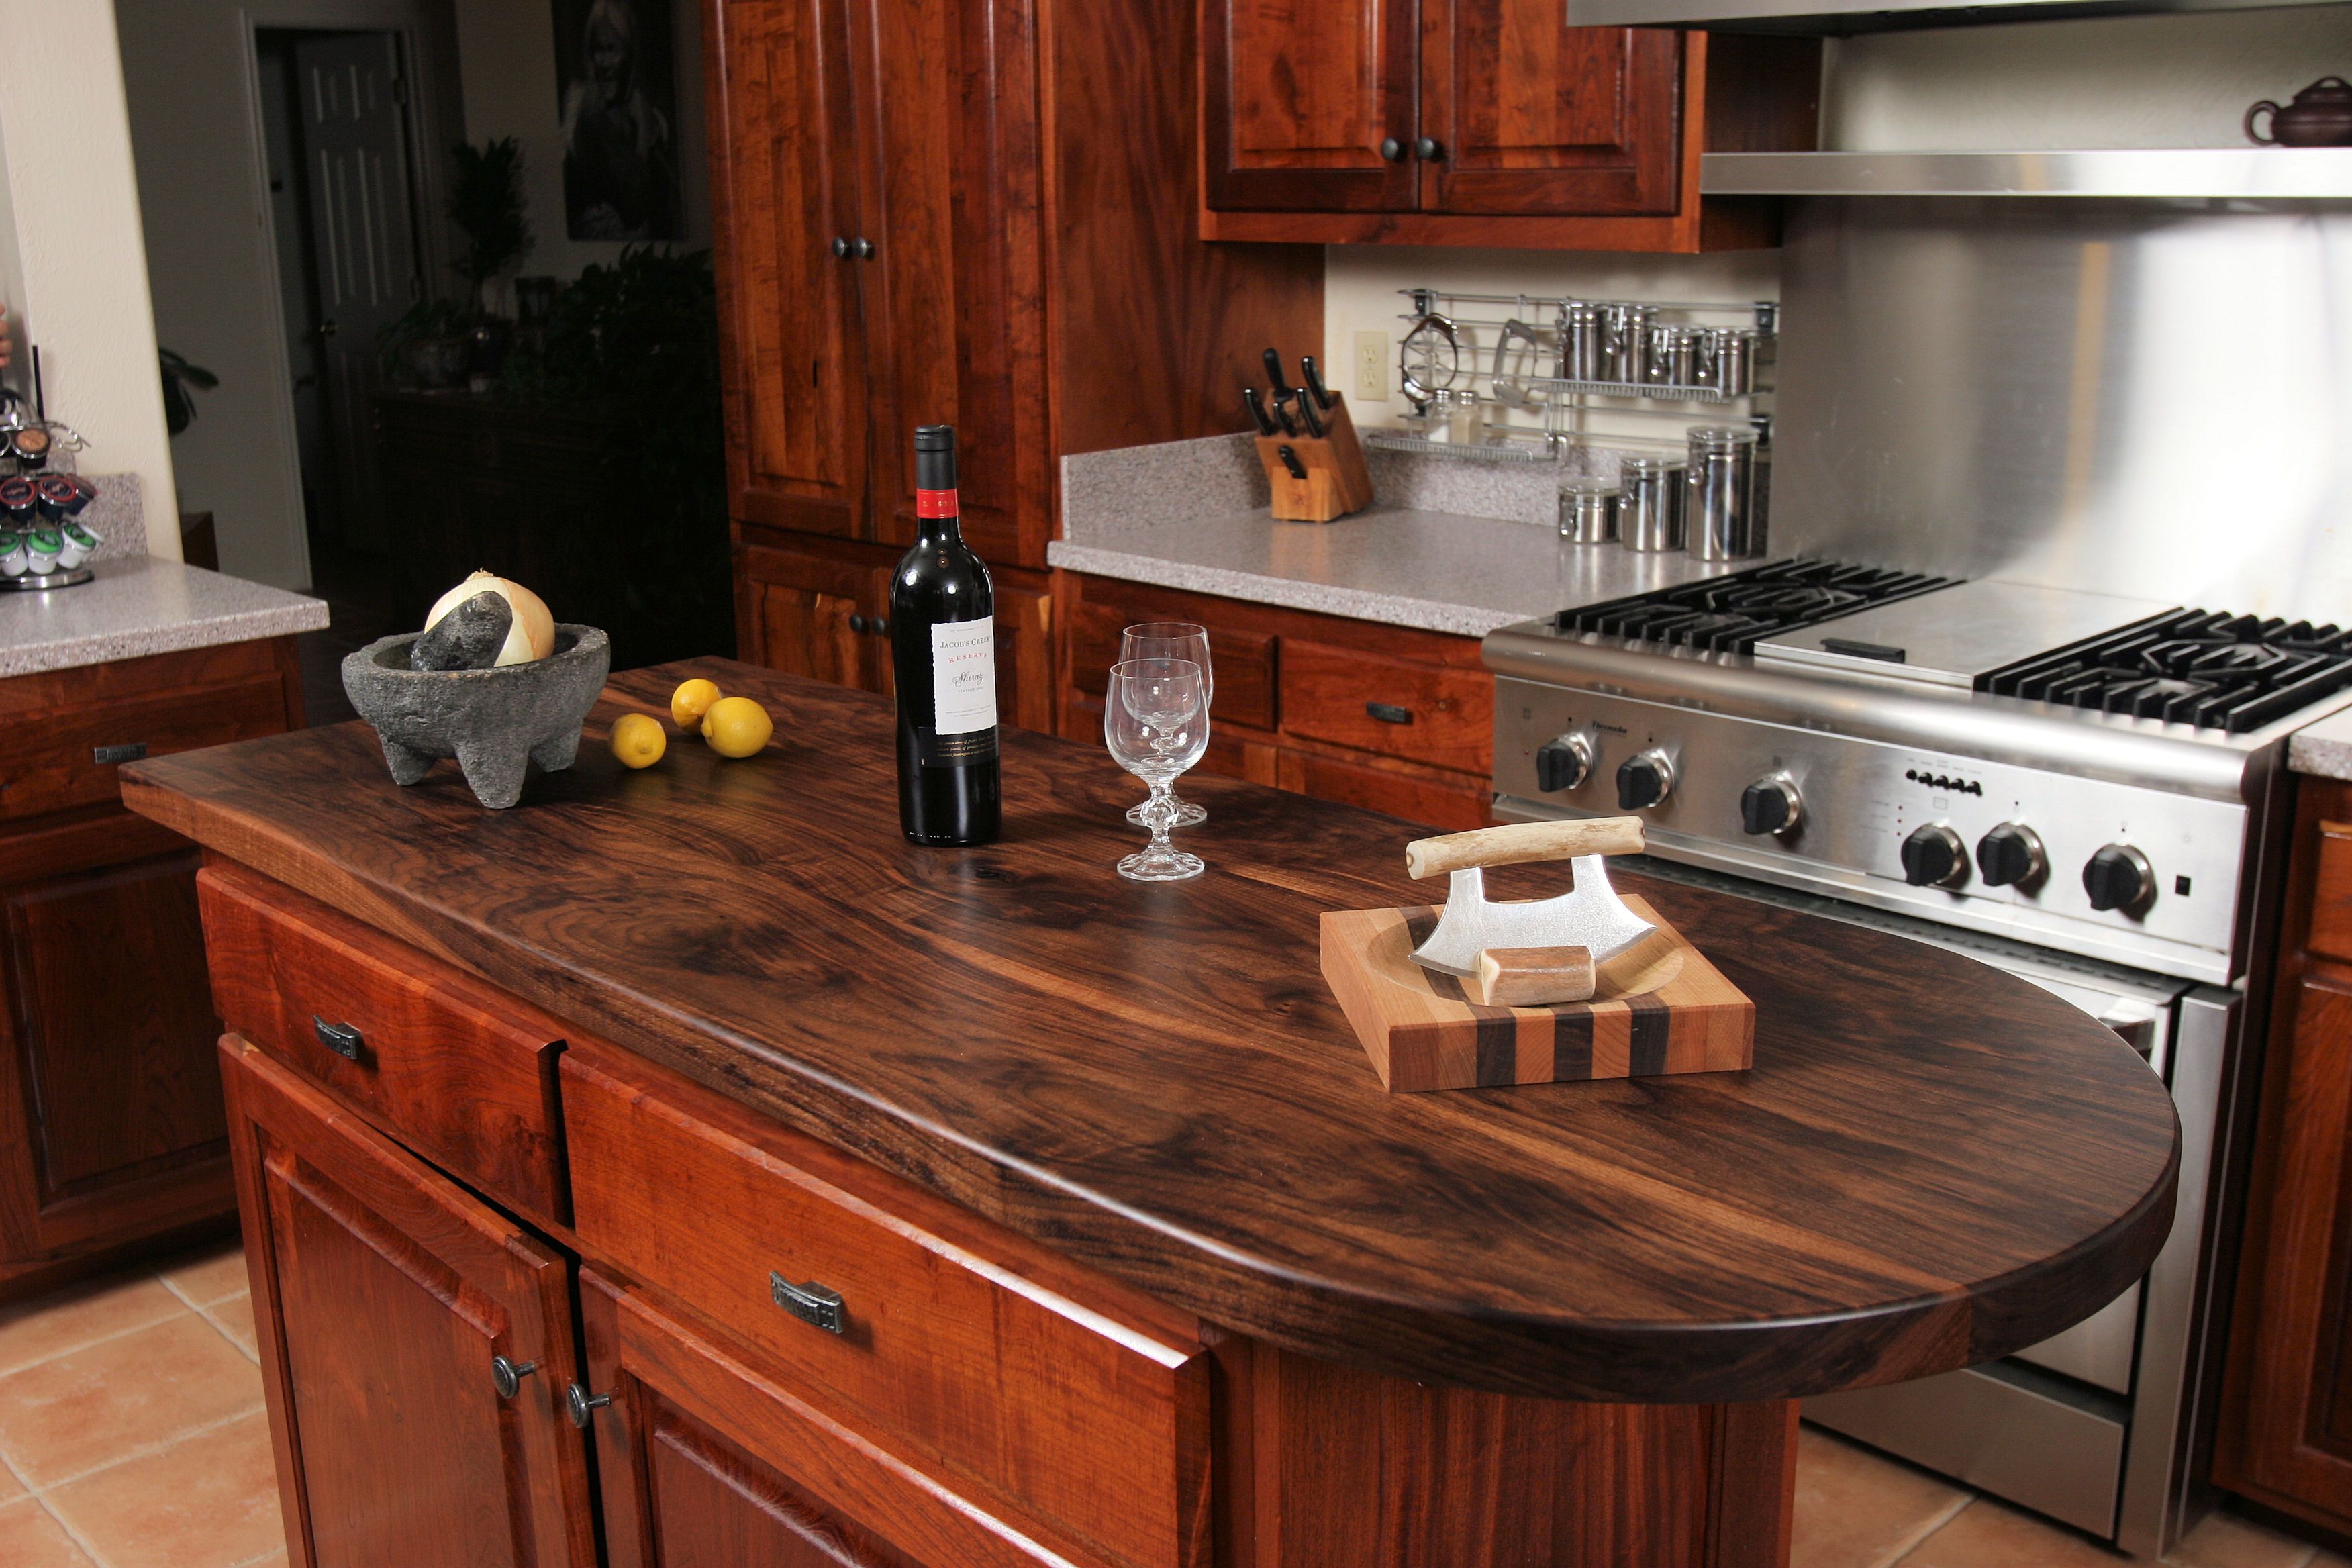 Custom Wood Countertop Options Finishes, How To Finish New Butcher Block Countertops